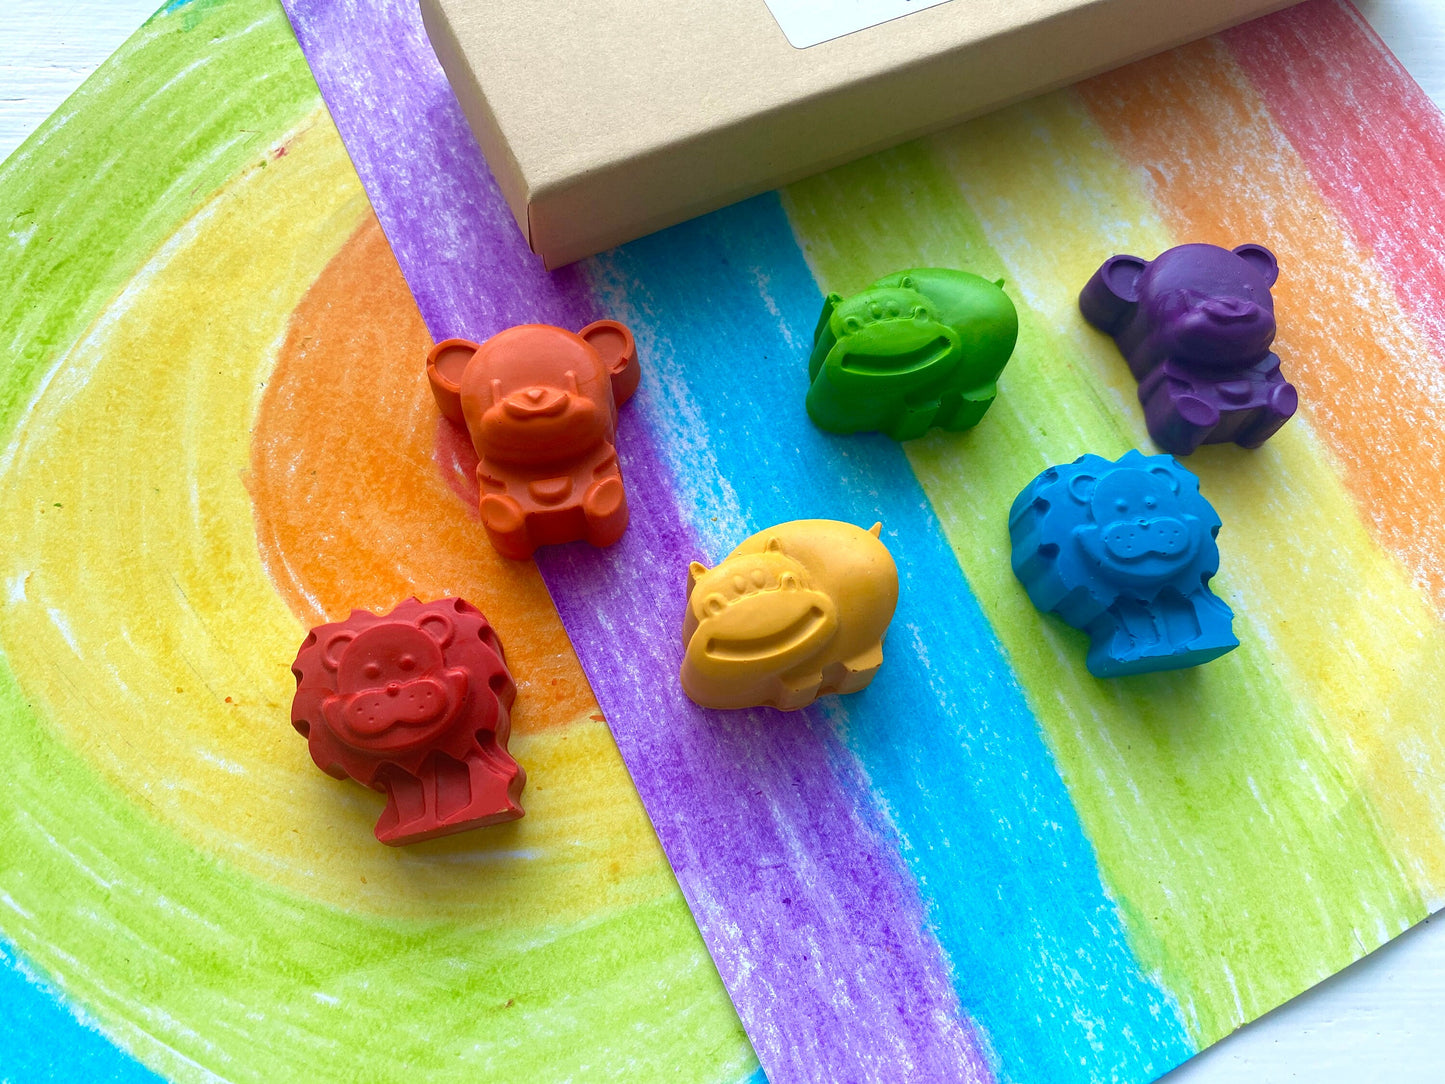 Animal Crayons - Gifts For Kids - Zoo Animal Party Favors - Kids Party Favors - Animal Party Favors - Kids Party Favors - Stocking Stuffers